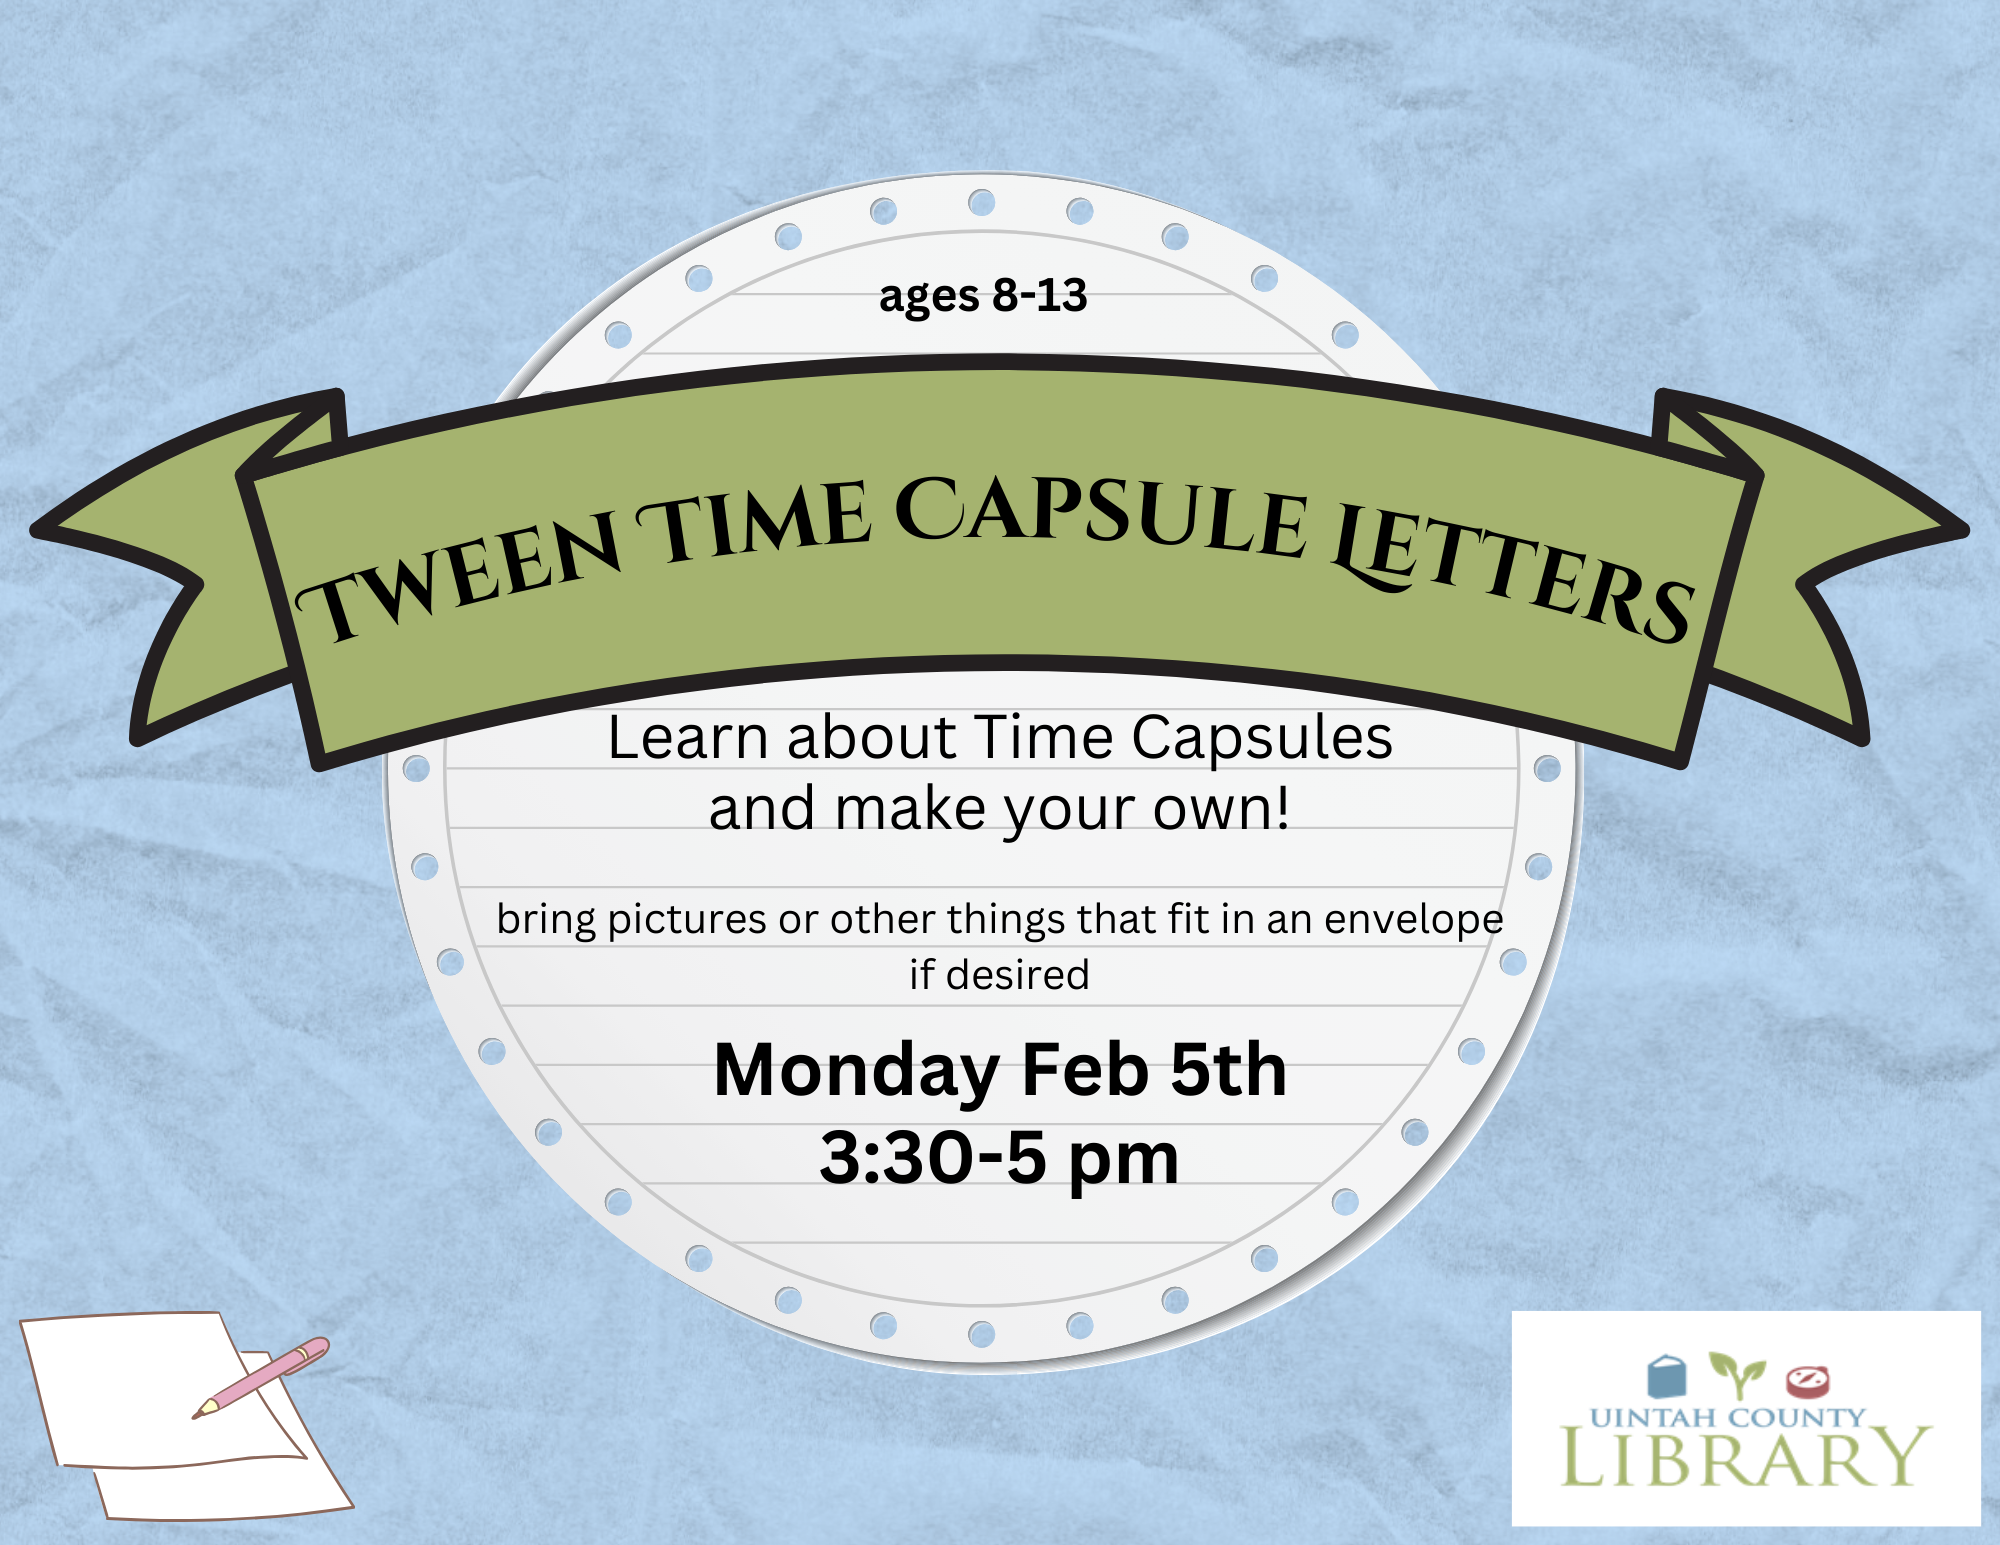 Tween Time Capsule Letters. Bring things that fit in an envelope, if desired. Open 3:30 - 5 pm